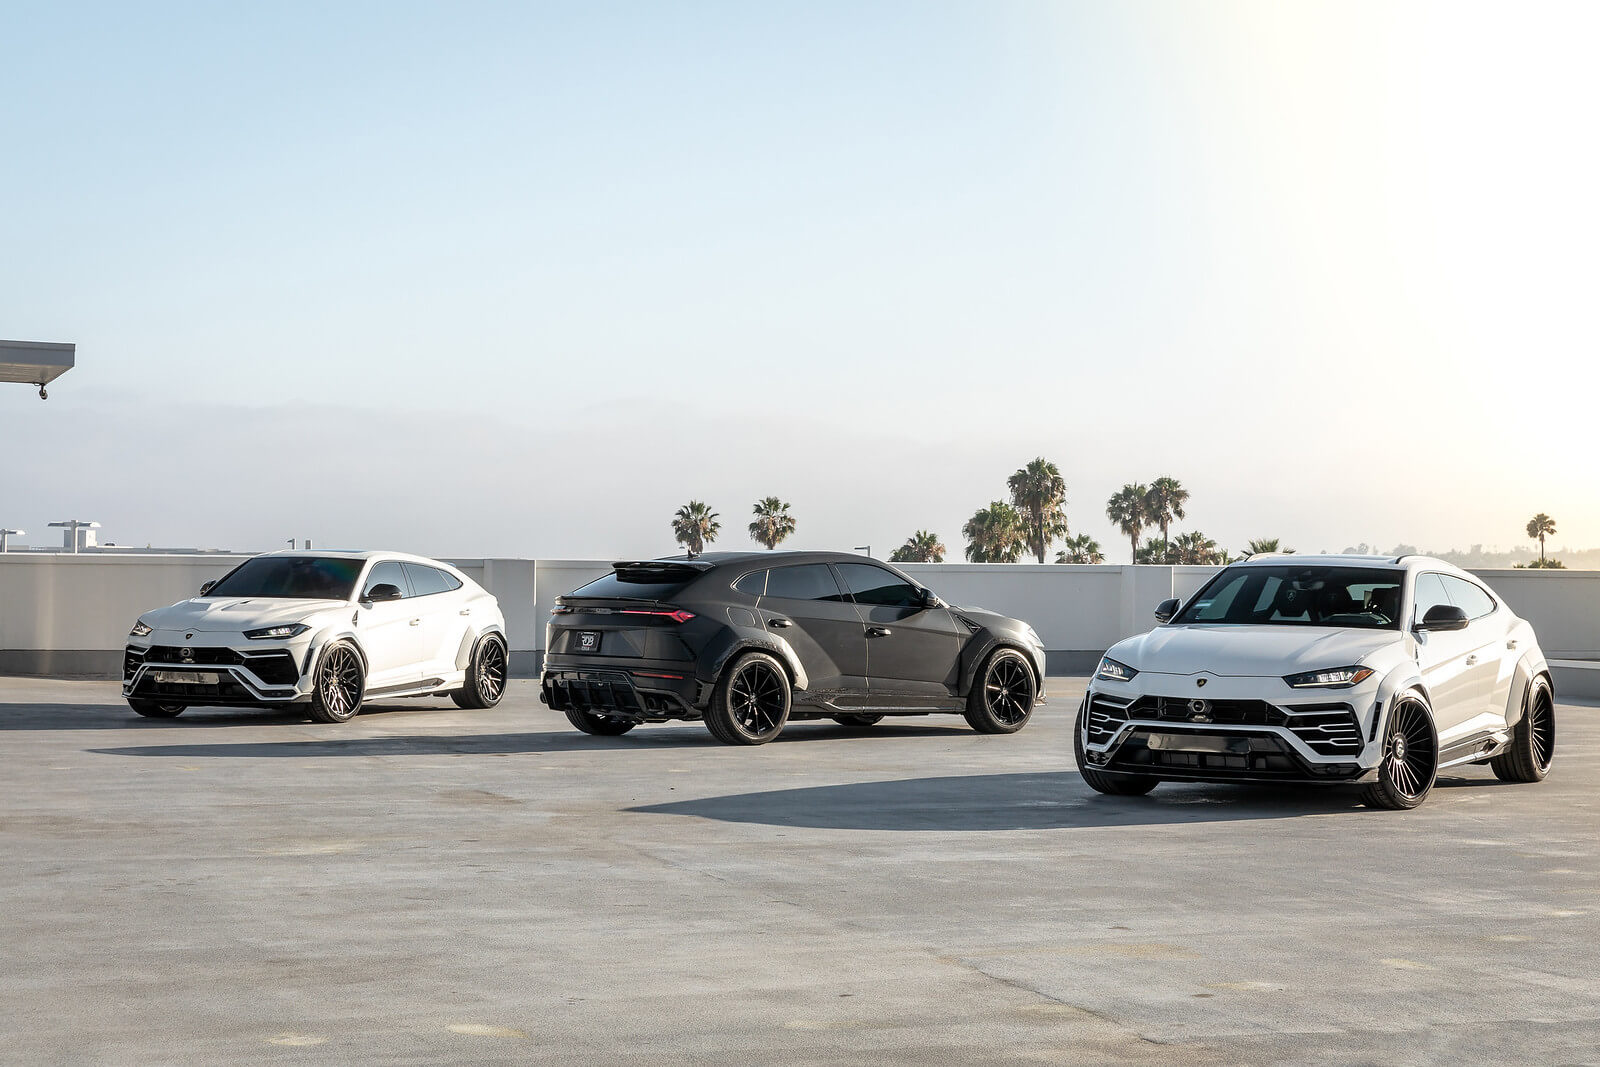 1016 Industries limited edition Urus offers a widebody kit.